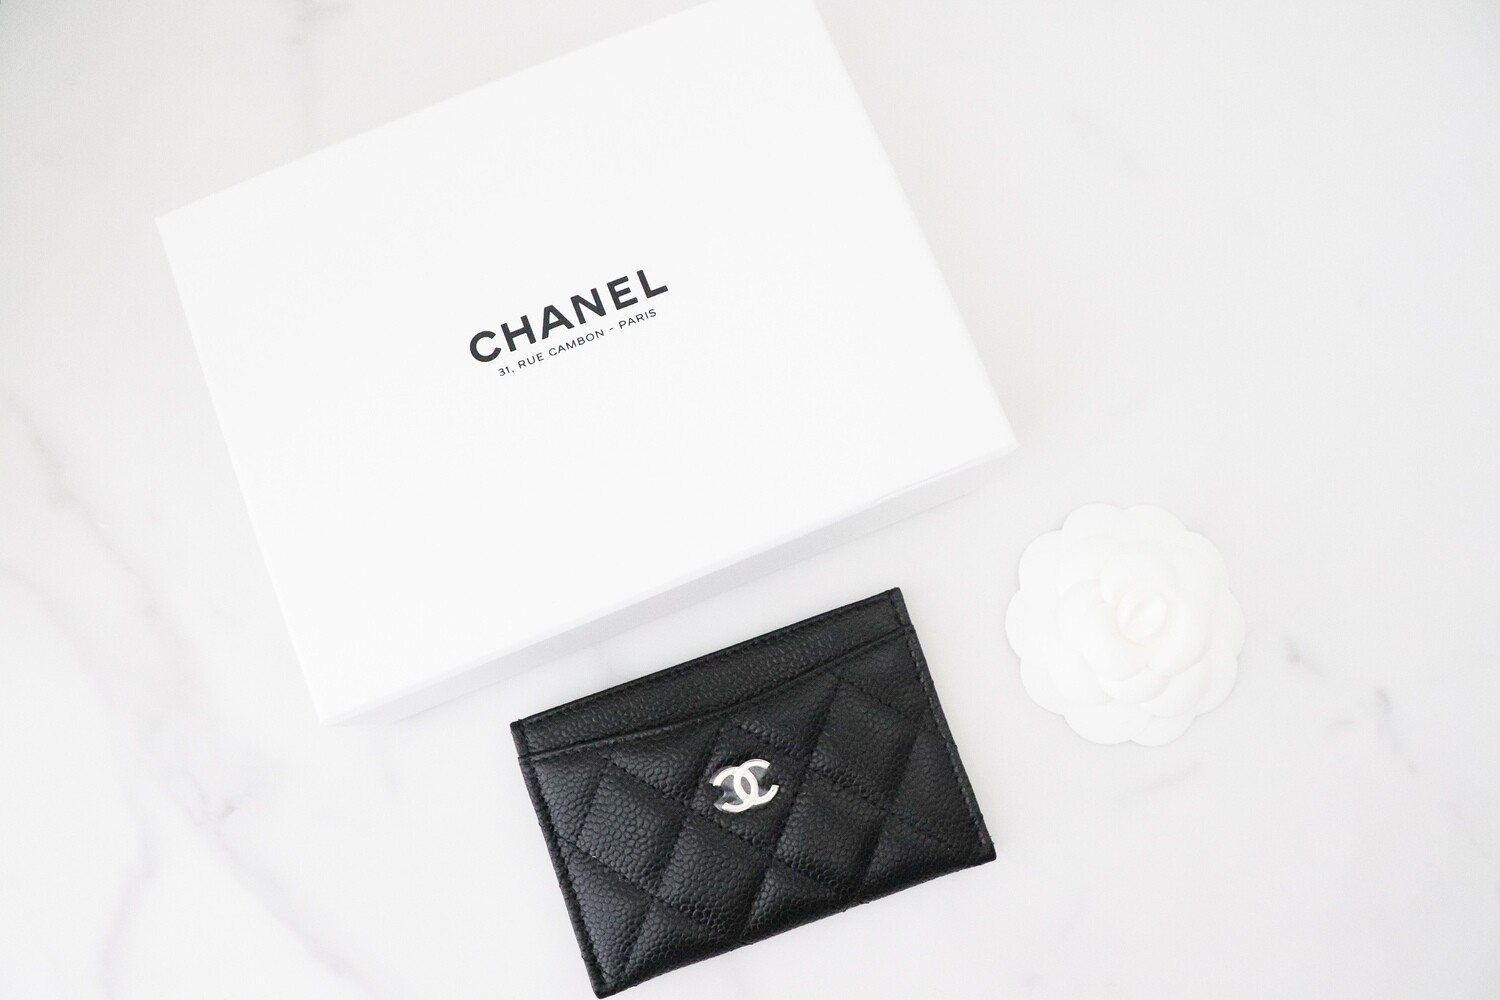 Chanel SLG Zippy Key Holder Card Case, Black Caviar Leather with Gold  Hardware, New in Box GA001